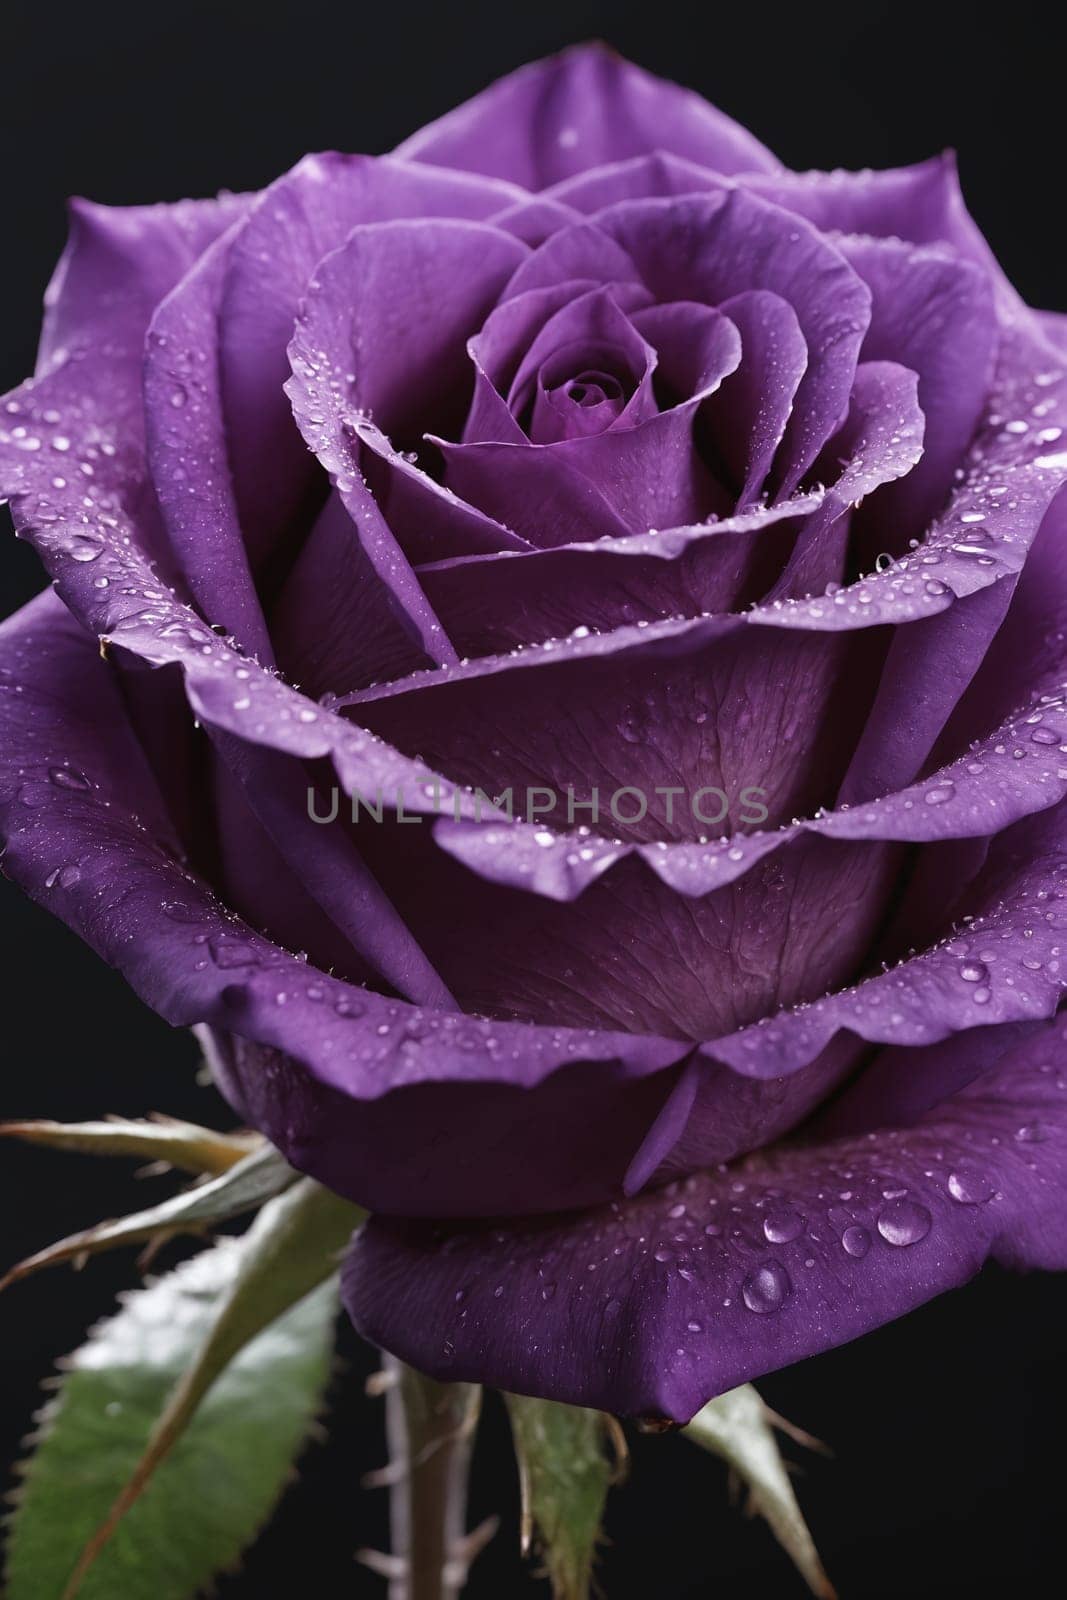 Morning Delight: A Close-up of a Dark Purple Rose with Dew Drops by Andre1ns